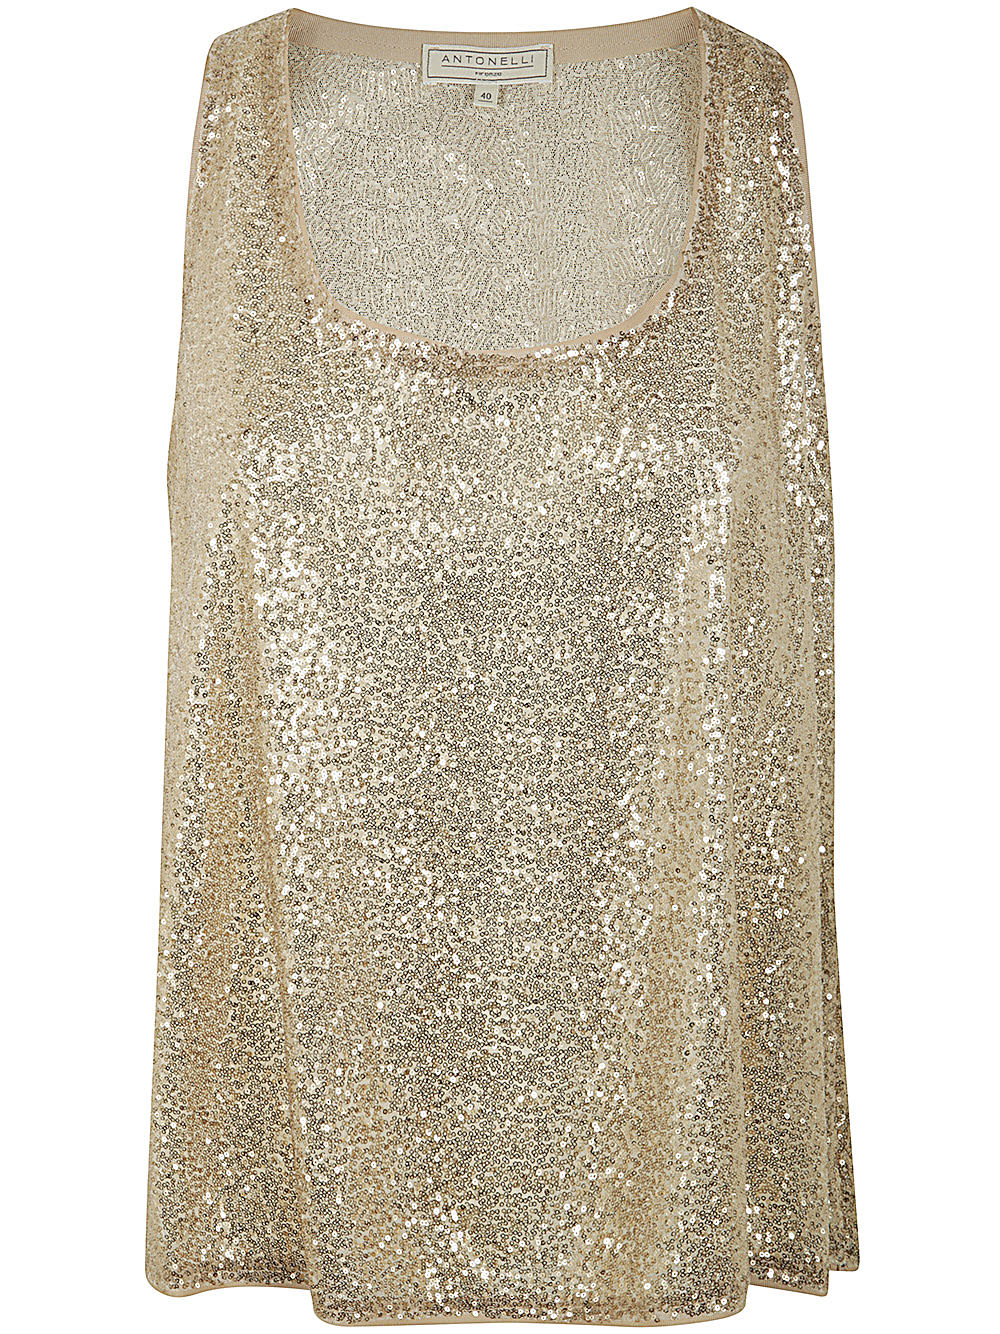 Antonelli Cecil Top With Paillettes In Gold